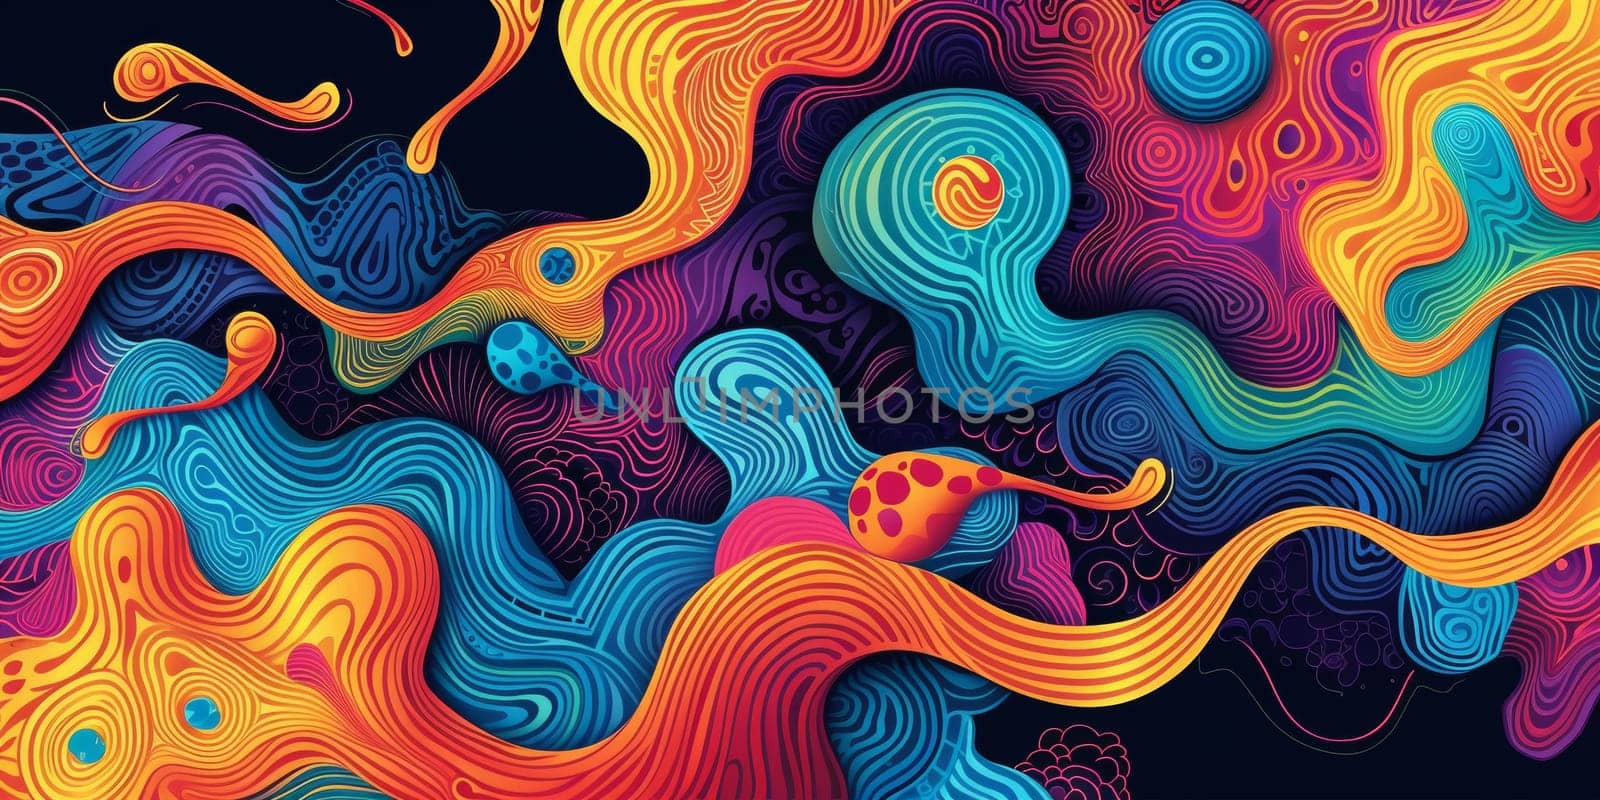 A colorful abstract painting with swirls and waves on a black background, AI by starush